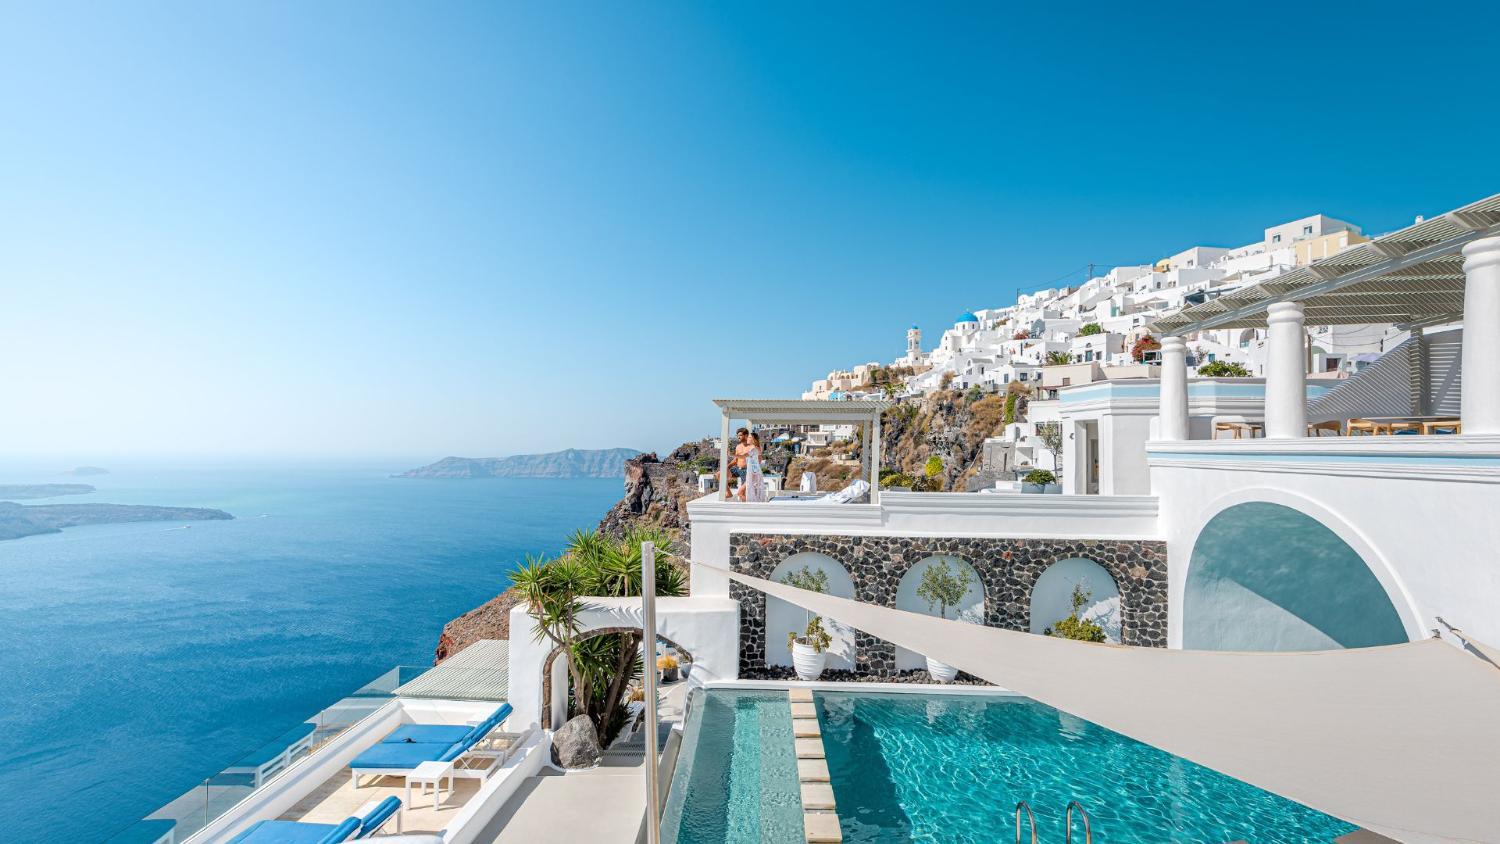 Hotel for Adults-only - Iconic Santorini, a Boutique Cave Hotel